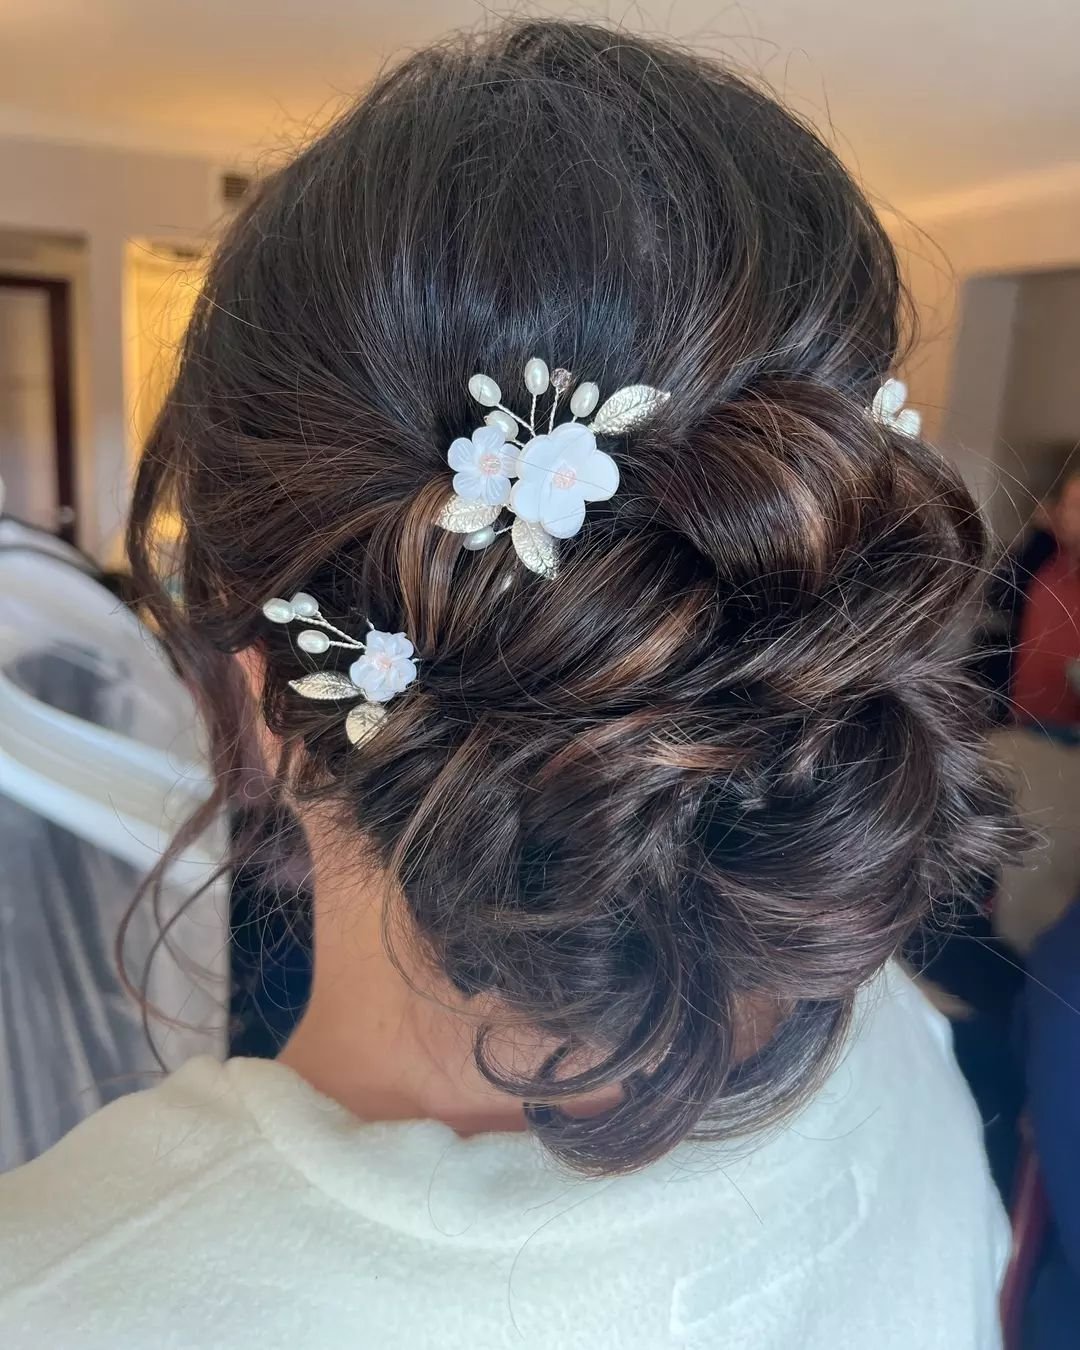 Obsessed with this twisted textured bridal updo! The hairpiece just added the perfect touch🌸💕💍
.
.
.
#bridalupdo #tetxuredupdo #brownhairupdo #eventhair #travelbeautyteam #detroitweddings #themakeuploft #hairandmakeupteam #updoobsessed